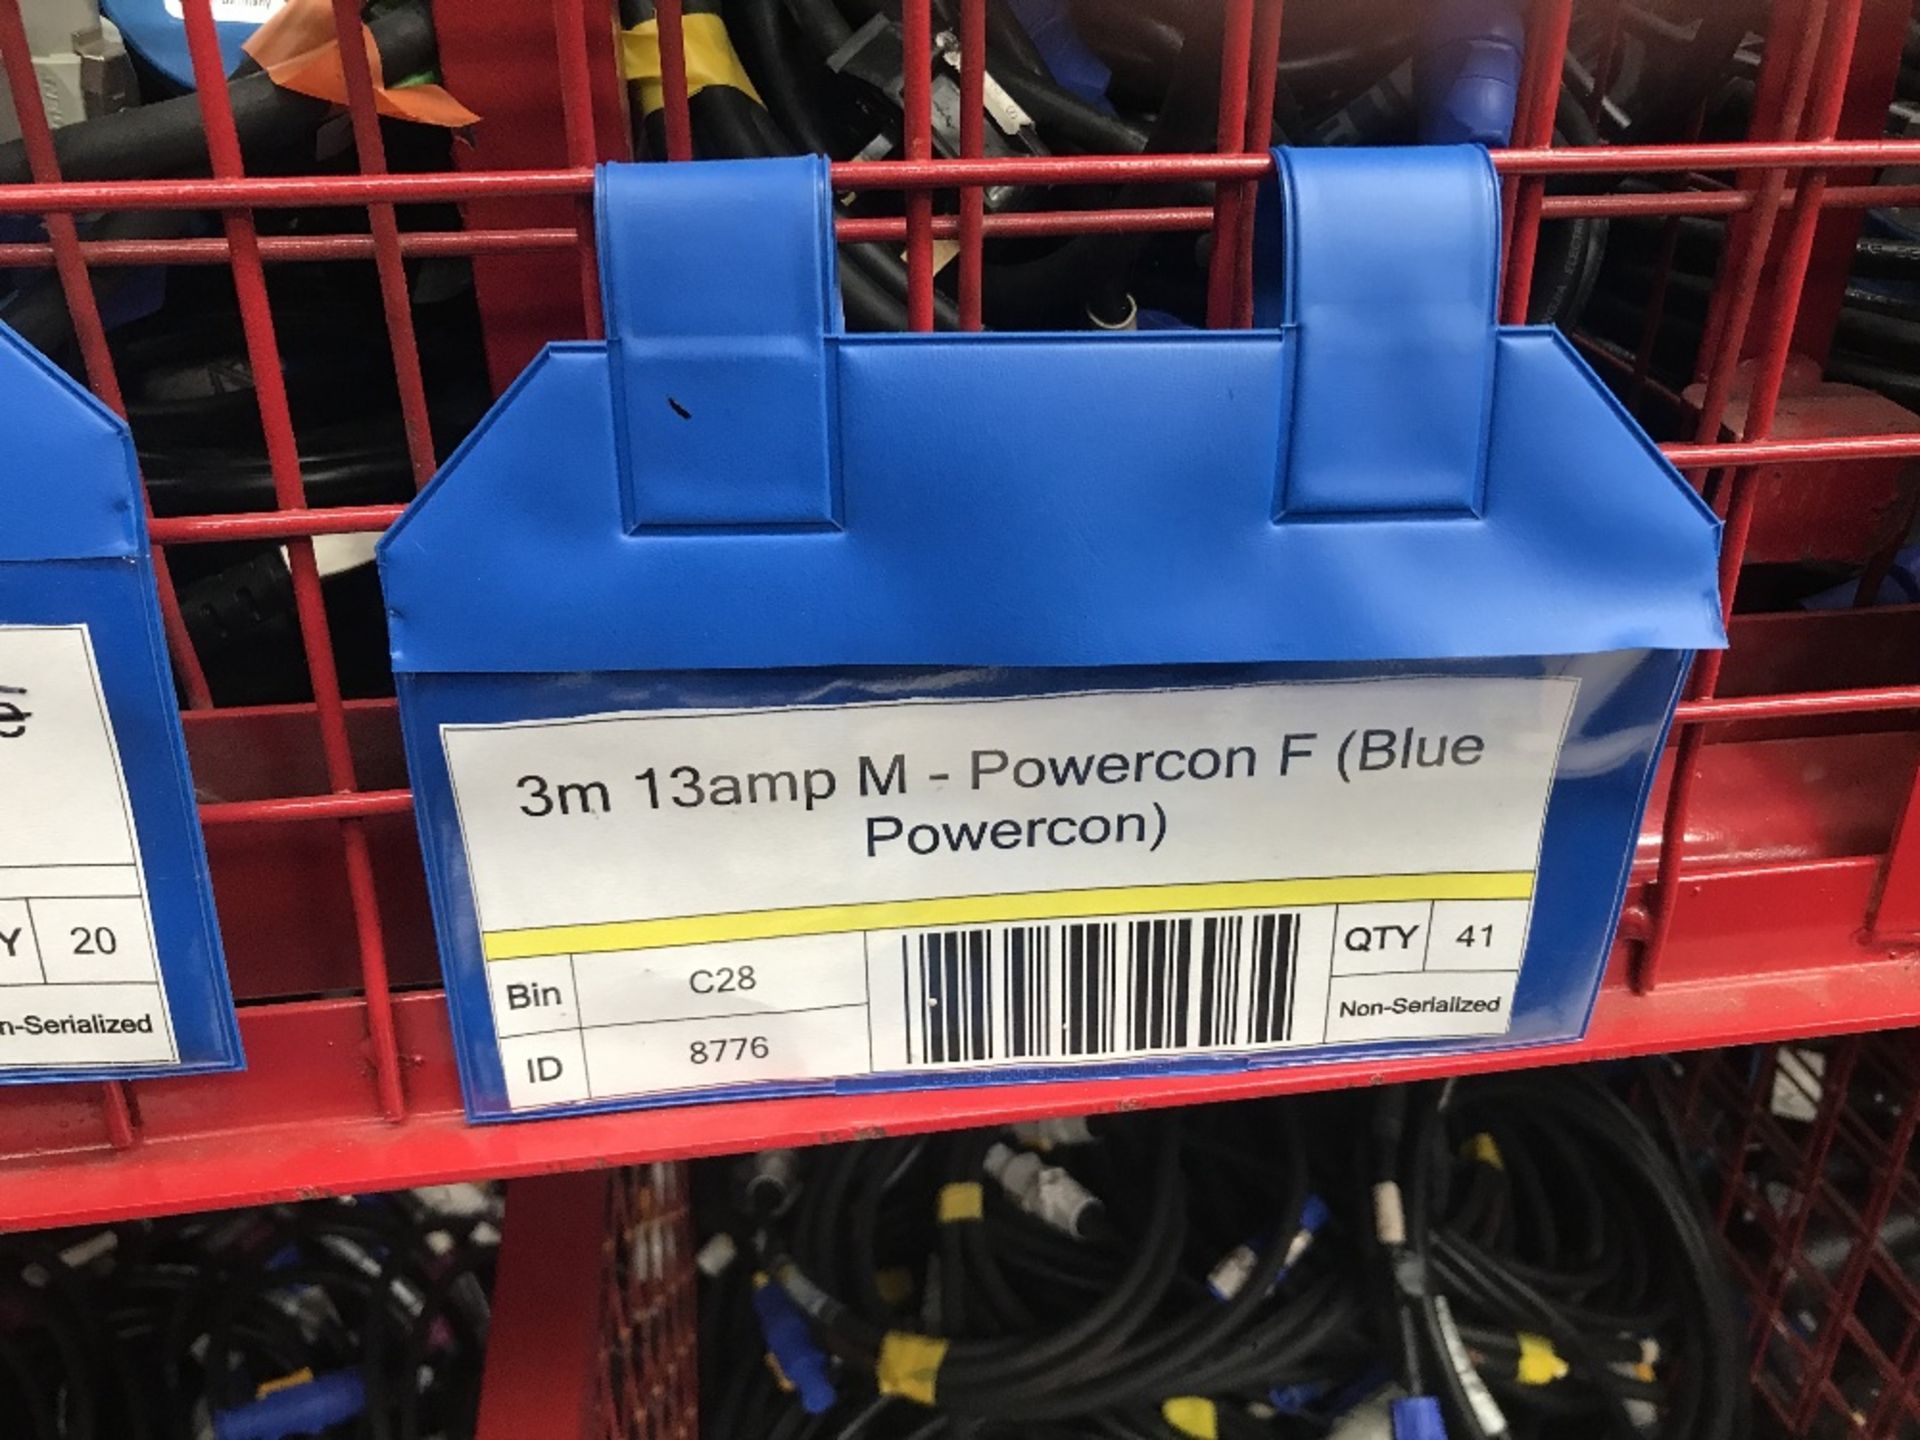 Large Quantity of 1m 16amp M - Powercon F Cable & 3m 13amp M - Powercon, 10m 13amp M - Powercon F - Image 3 of 4